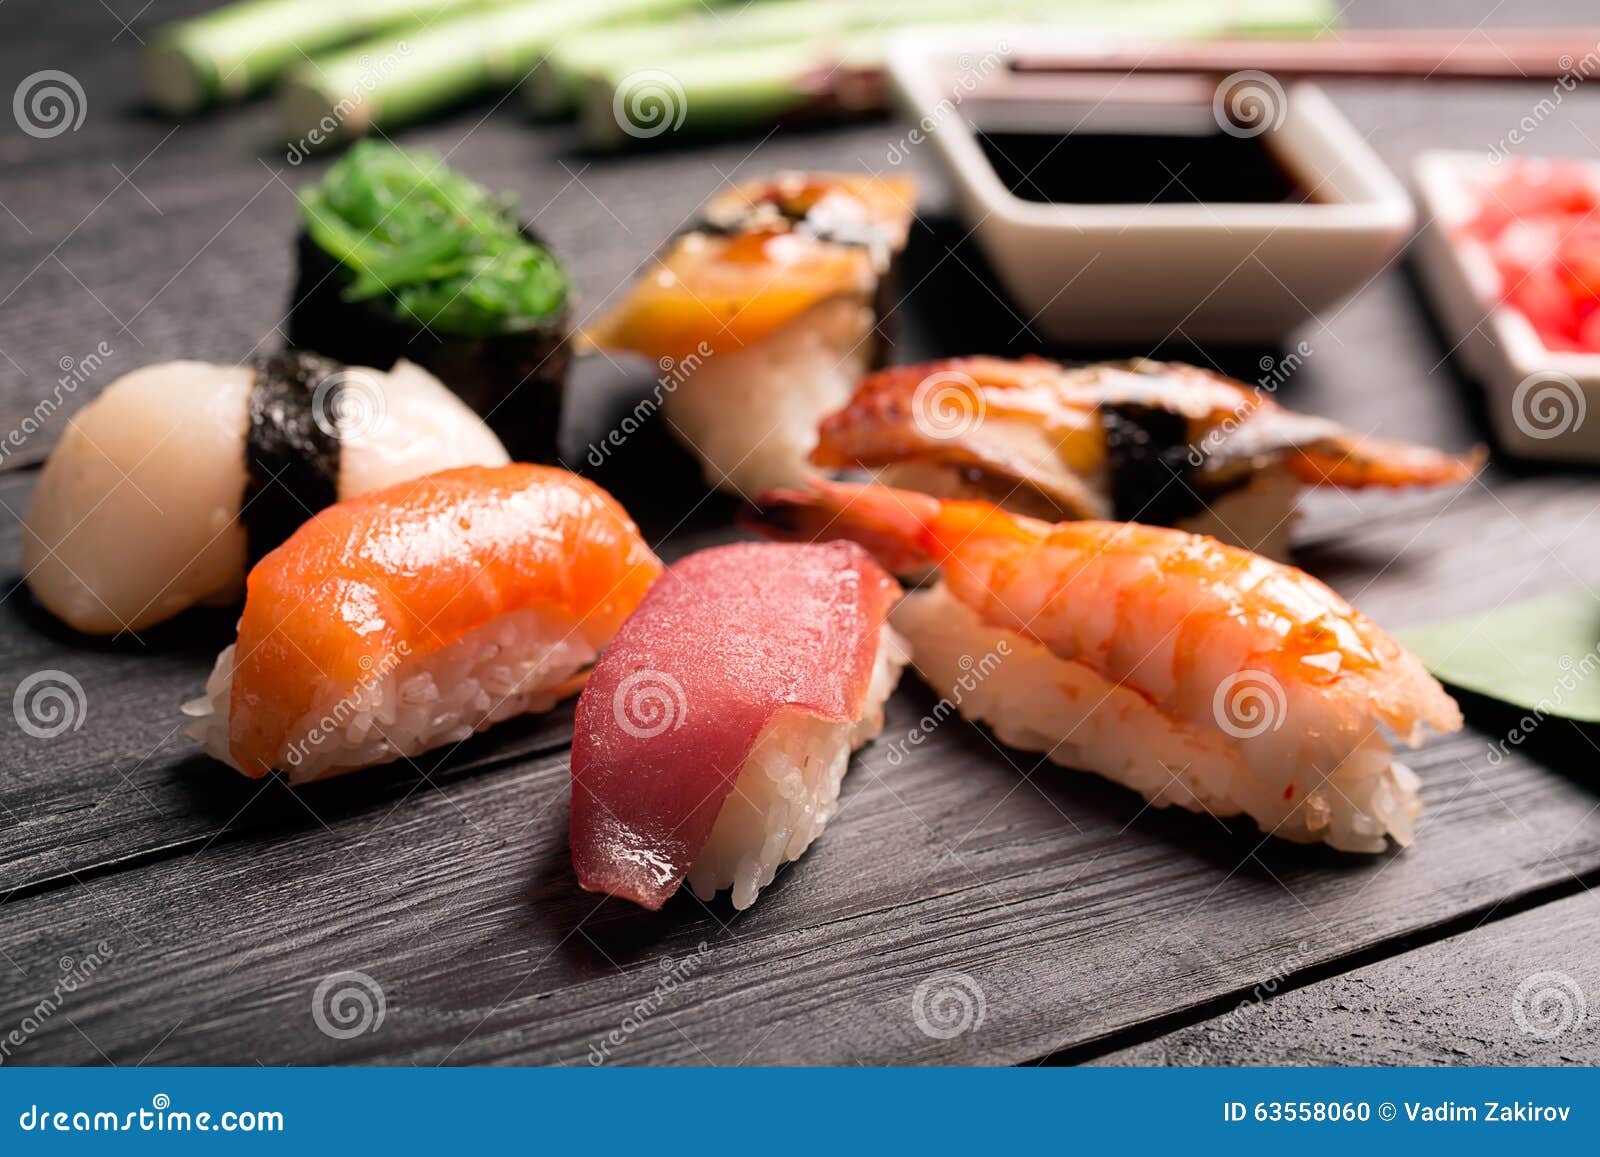 Photo about Traditional japanese sushi with fish and rice. 